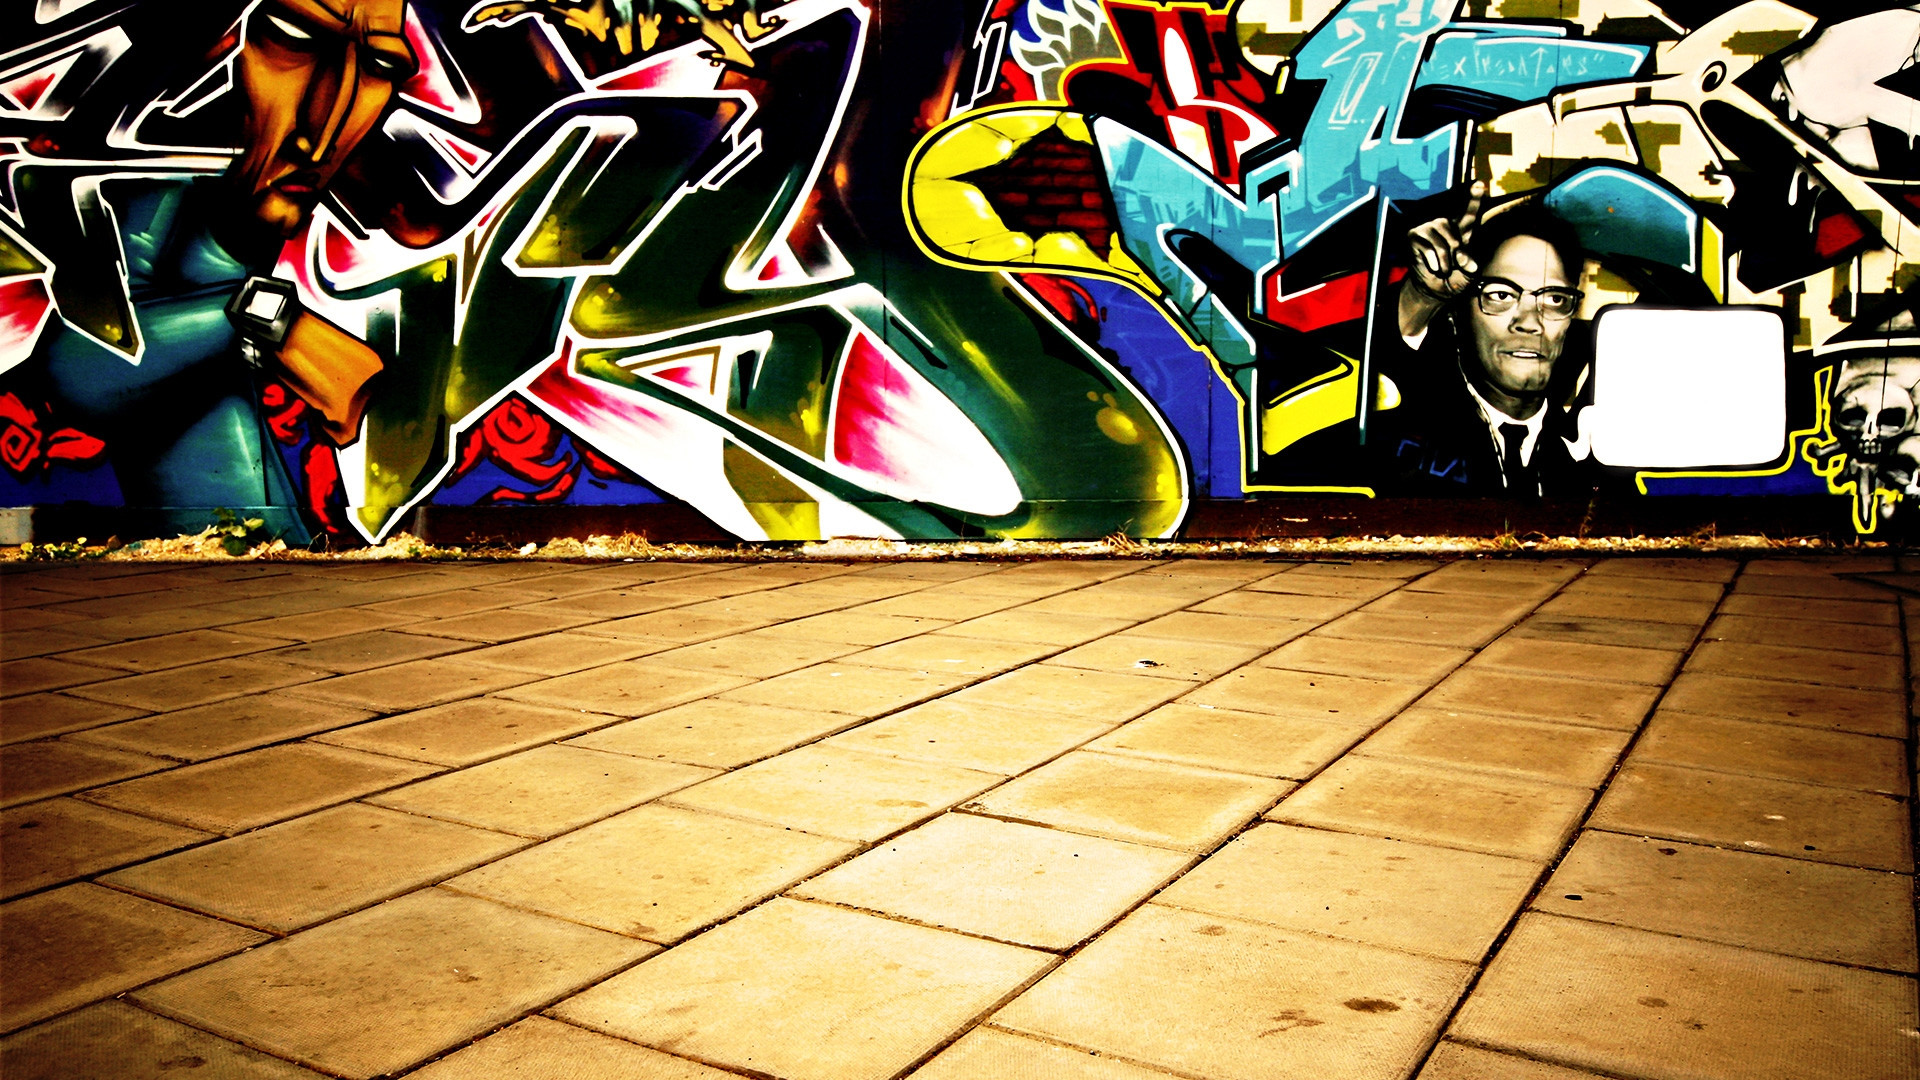 1920x1080 Graffiti Wallpapers For Bedrooms Download Free Graffiti Wallpapers For Your  Mobile Phone Most | Hd